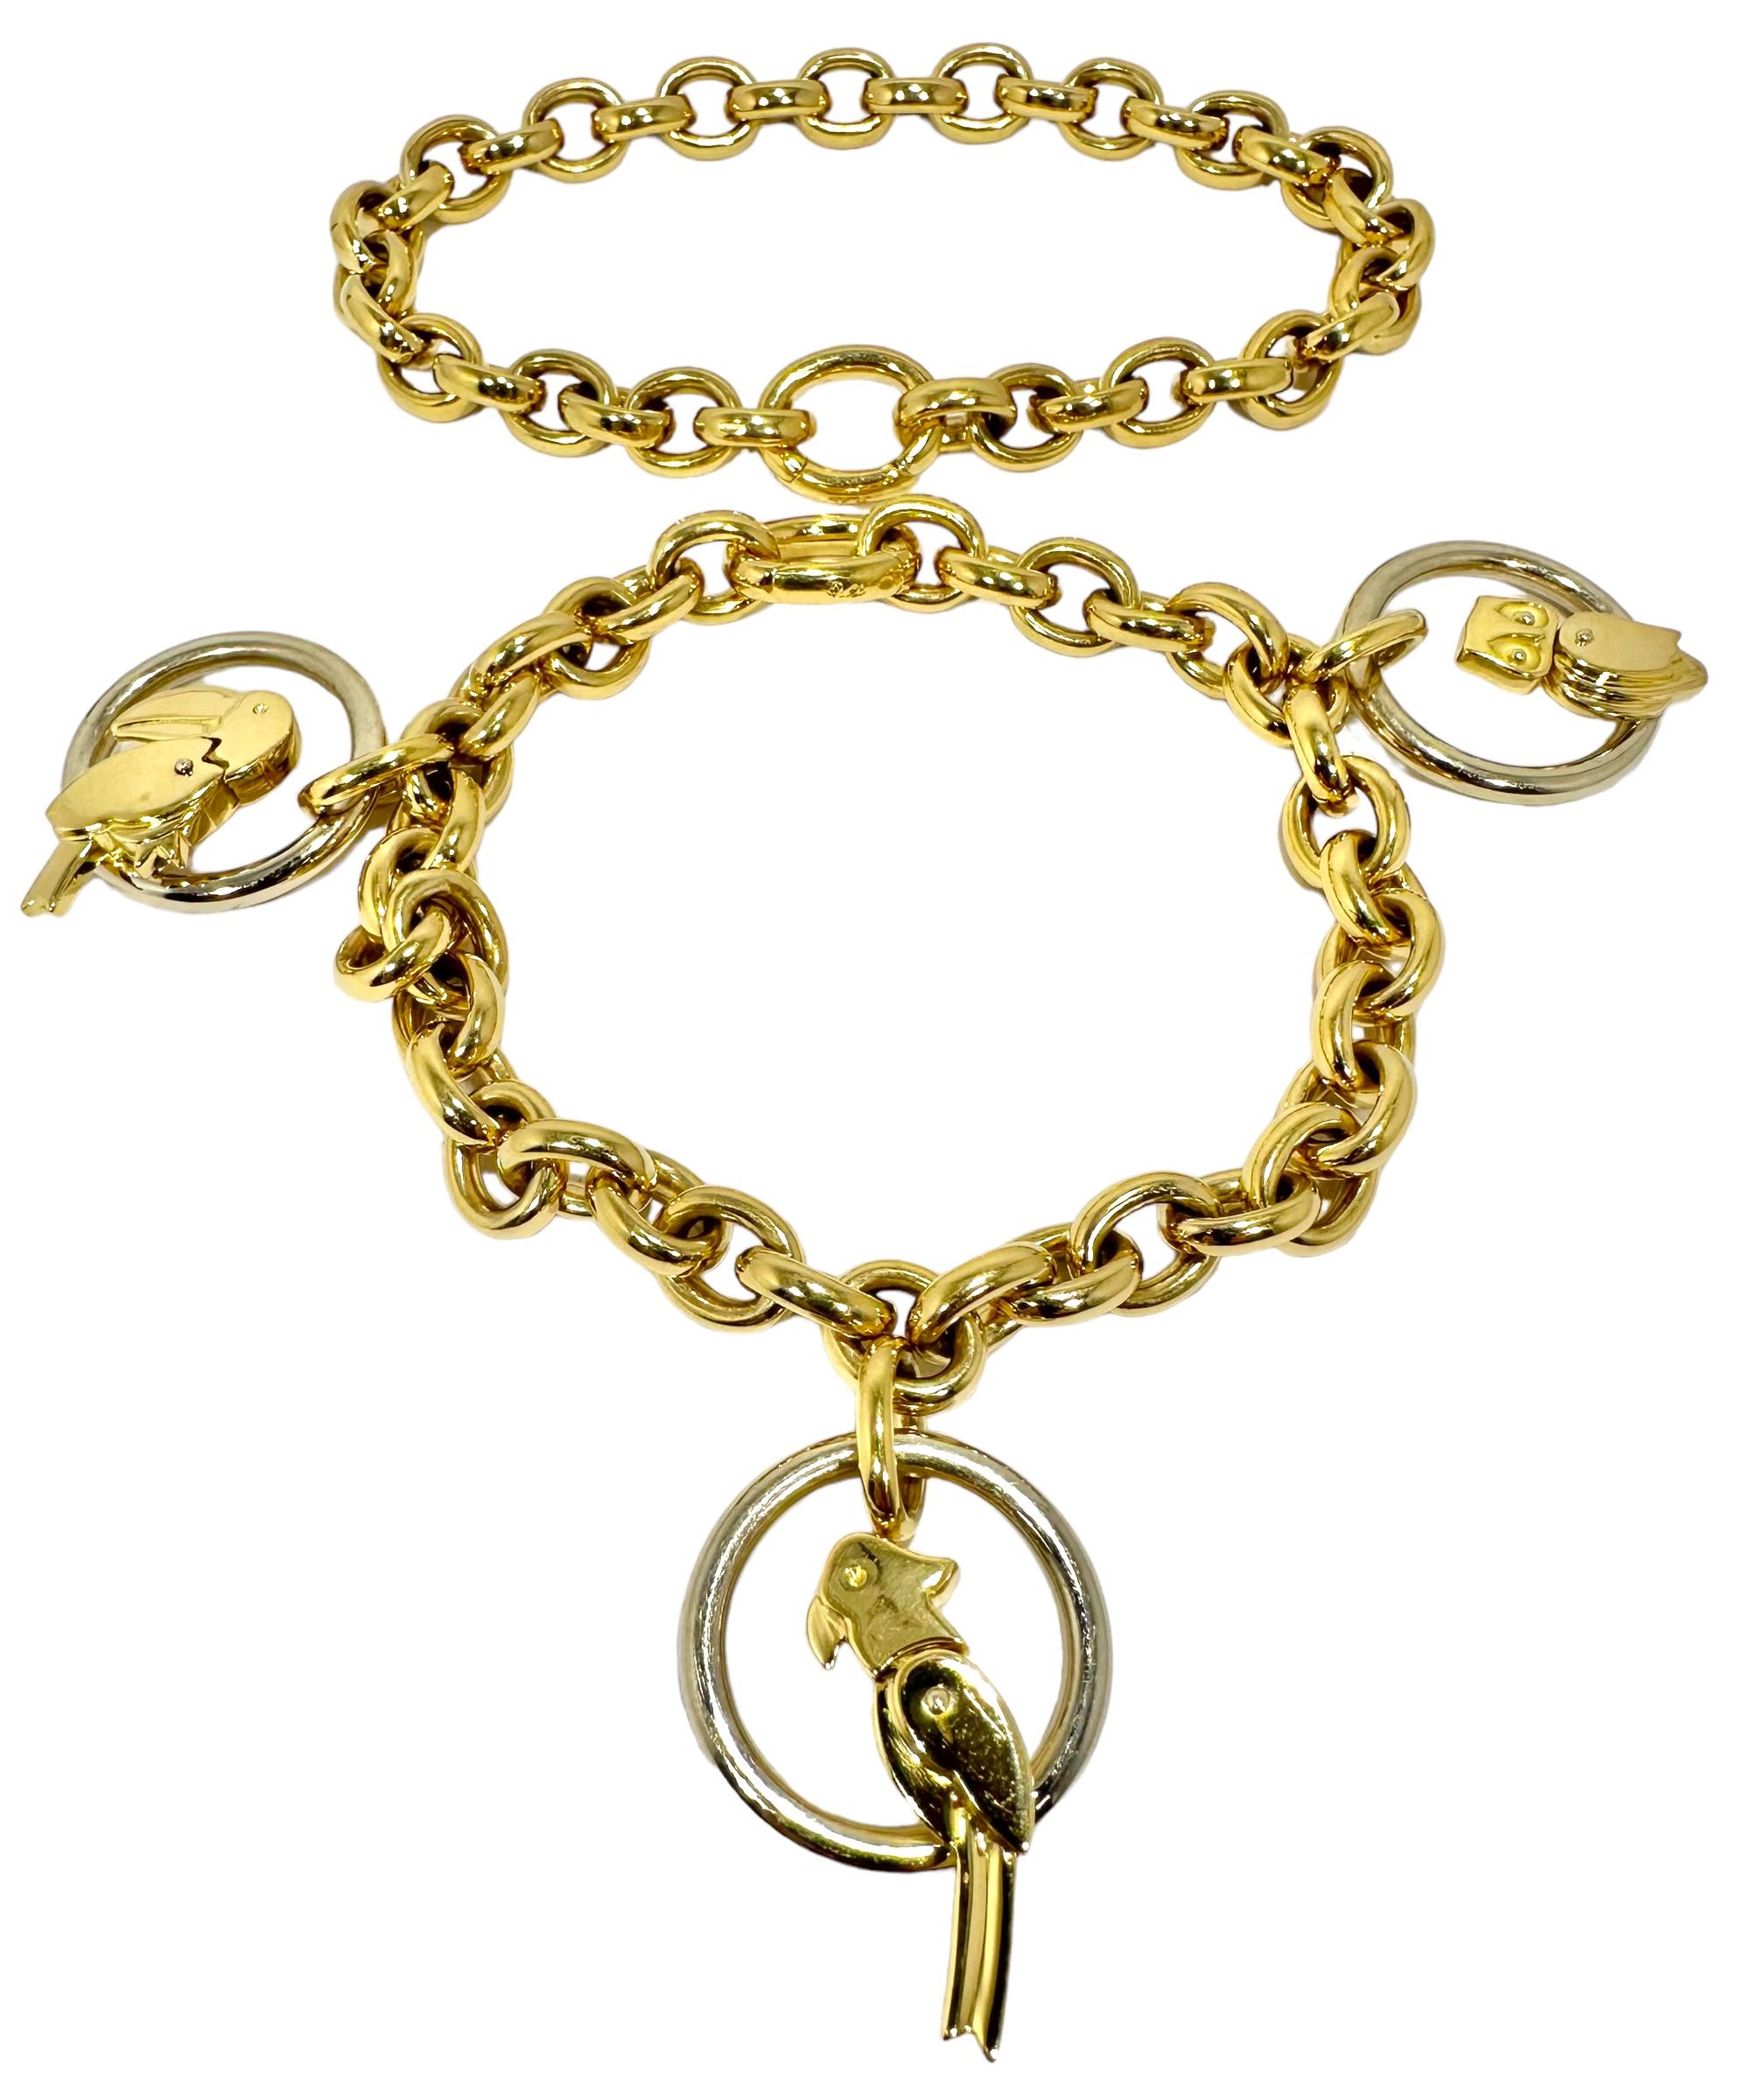 This very unusual 18k yellow gold necklace by designer Pomellato, features three separate bird pendants; a Toucan, a Parrot and an Owl, each perched in a ring of 18k white gold. This lovely jewel can be worn as a 15 inch choker length necklace, or